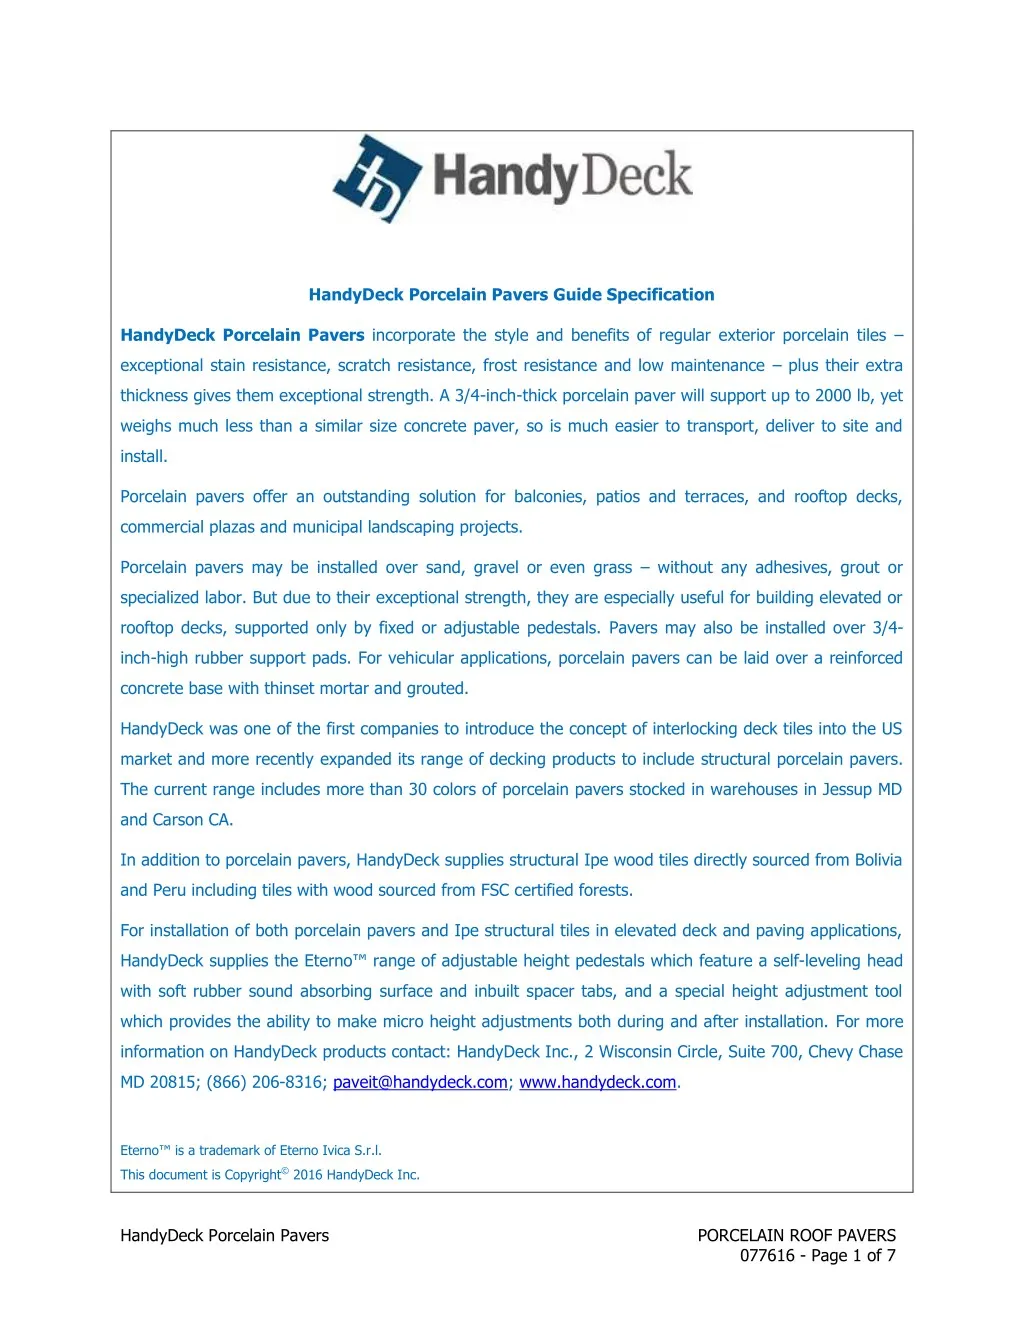 handydeck porcelain pavers guide specification